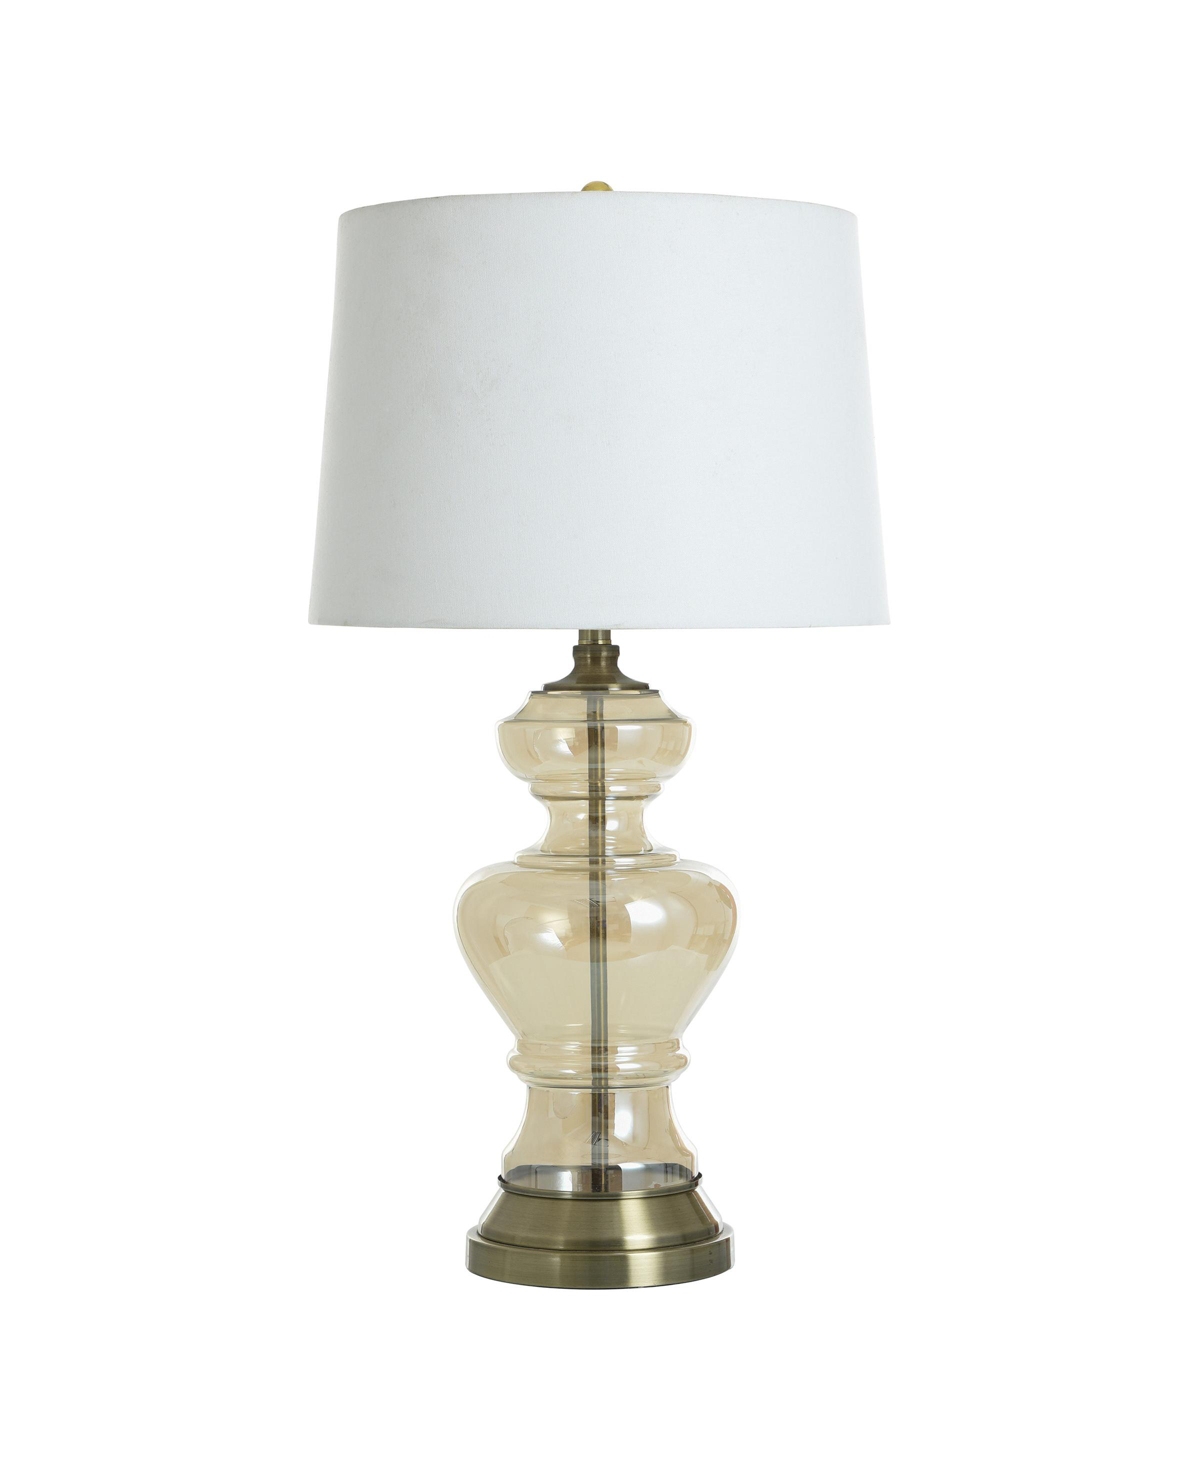 Stylecraft Home Collection 33" Opulence Elegant Gold-tone Luster With Urn Shaped Table Lamp In Brushed Brass,clear